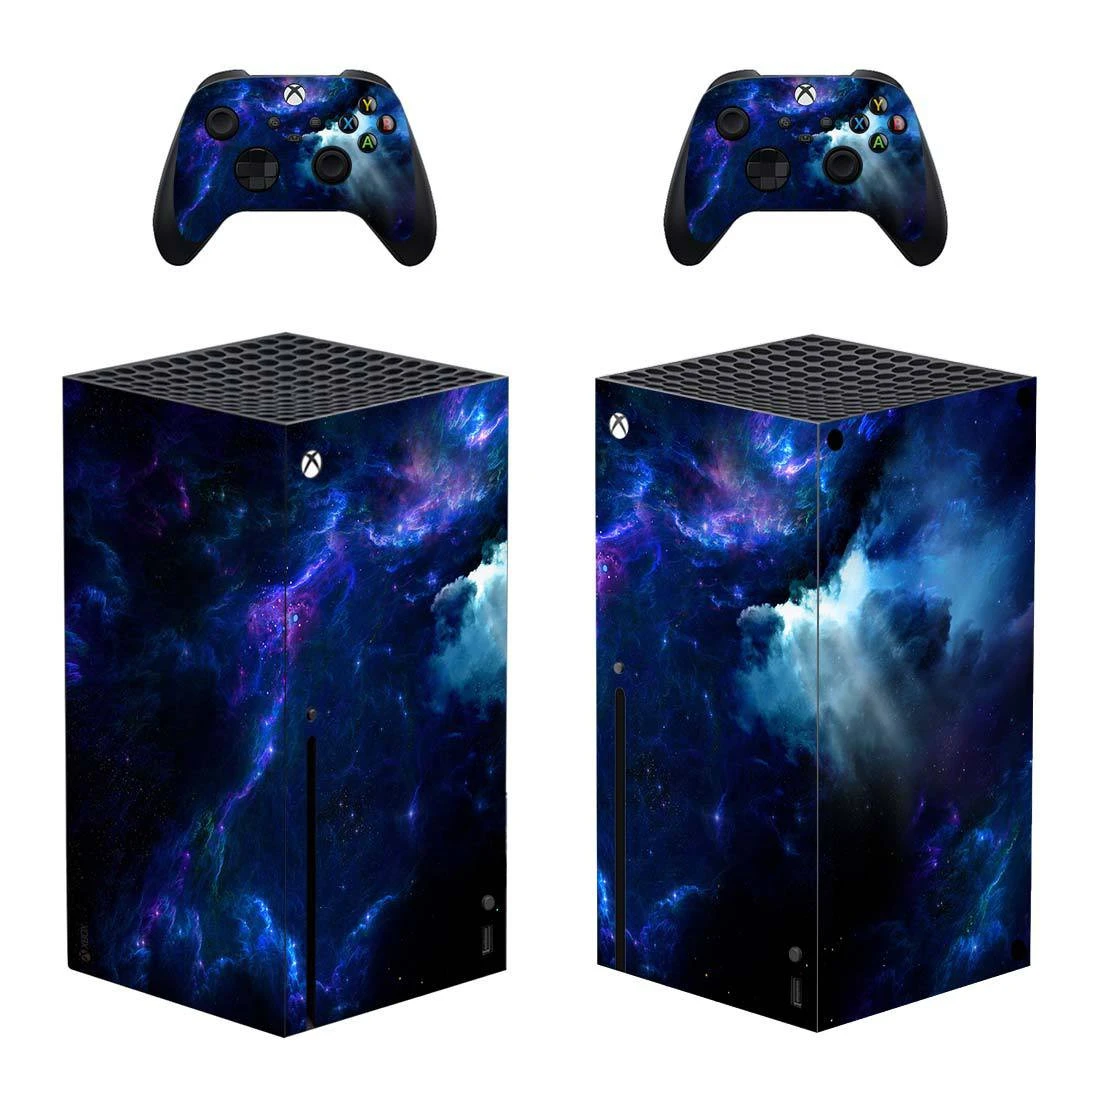 Travelcool Stickers for XBox Series X Game Console Protection Console Sticker Protective Skin Cover for Xbox Series X Sticker